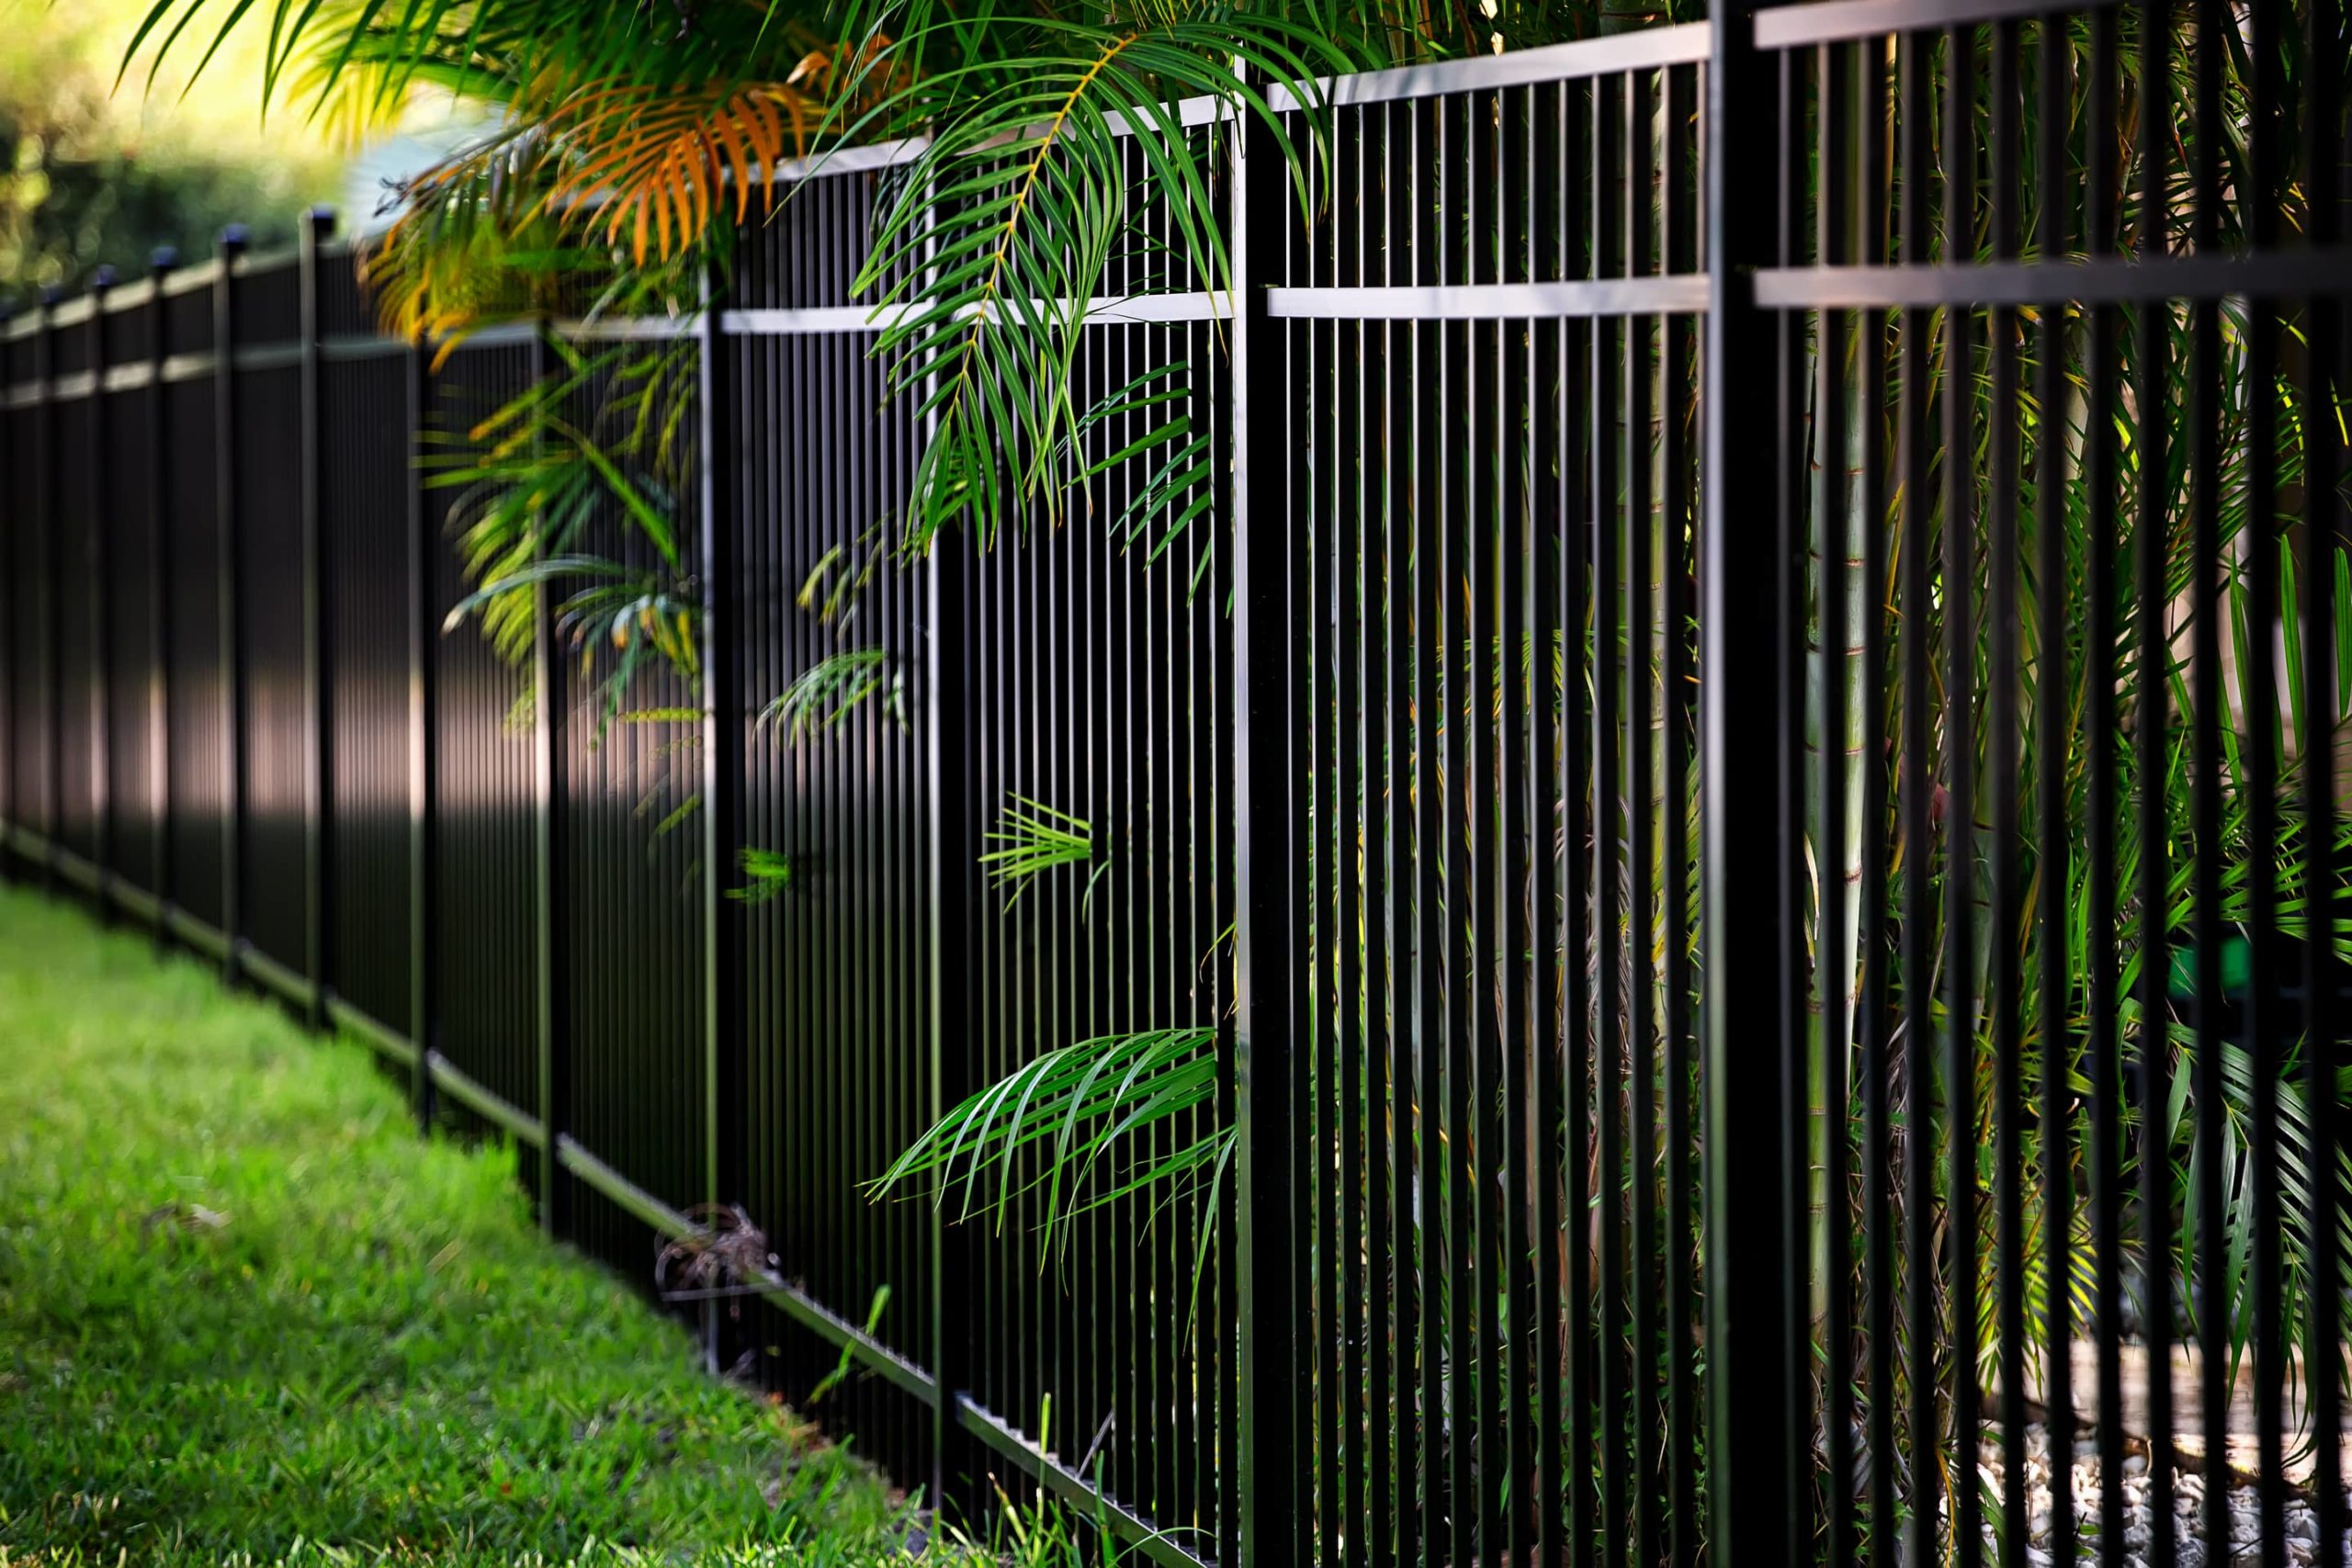 This image is of a tall metal fence surrounding a property.